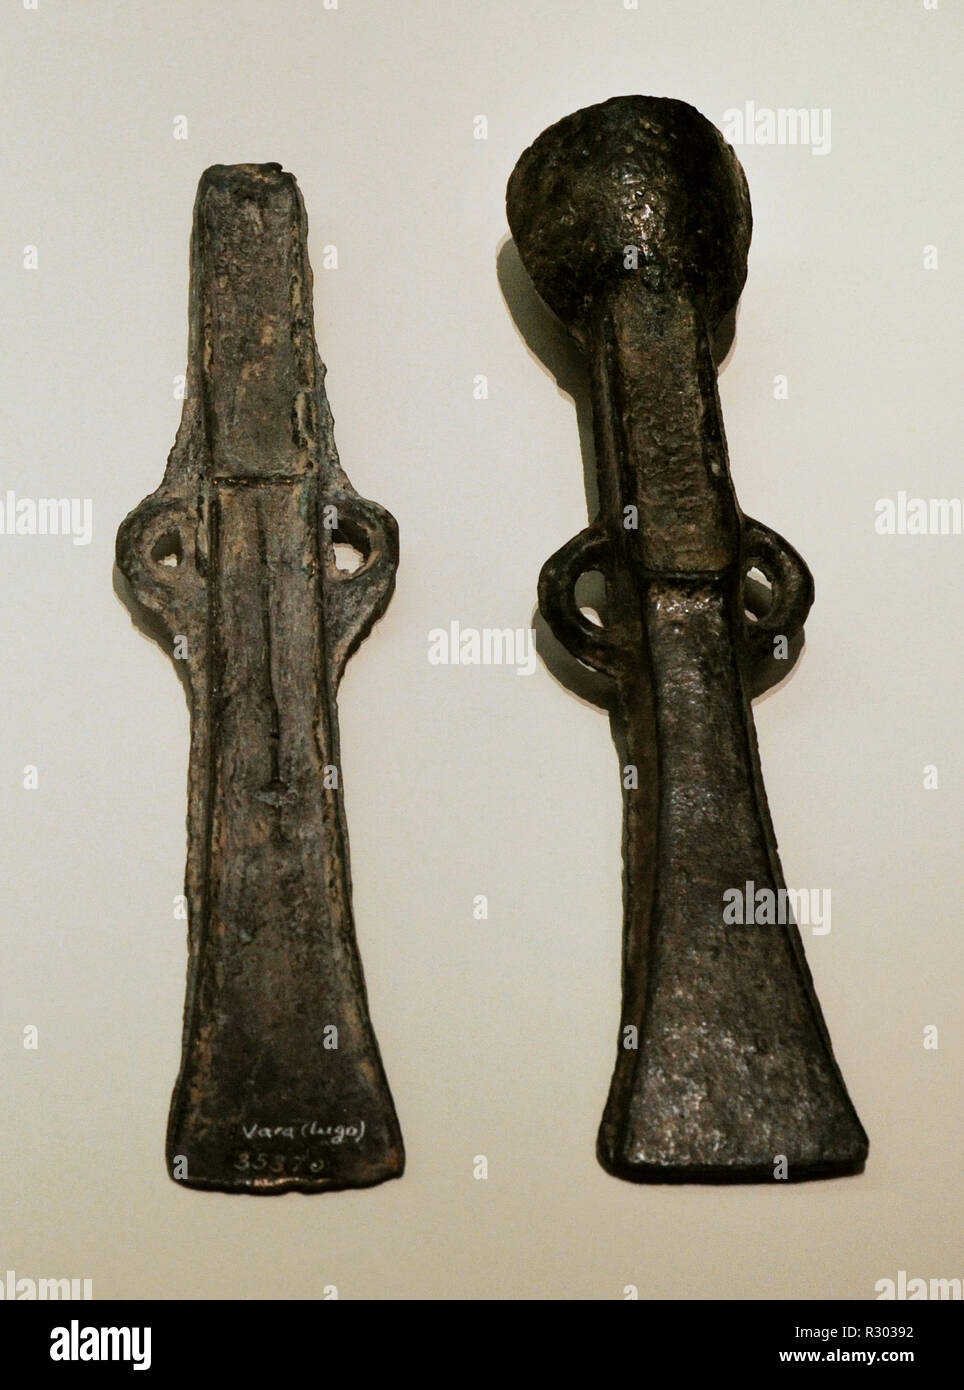 Bronze heel axes. Late Bronze Age-Iron I. Vara (Lugo, Galicia) and province of Leon. National Archaeological Museum. Madrid. Spain. Stock Photo